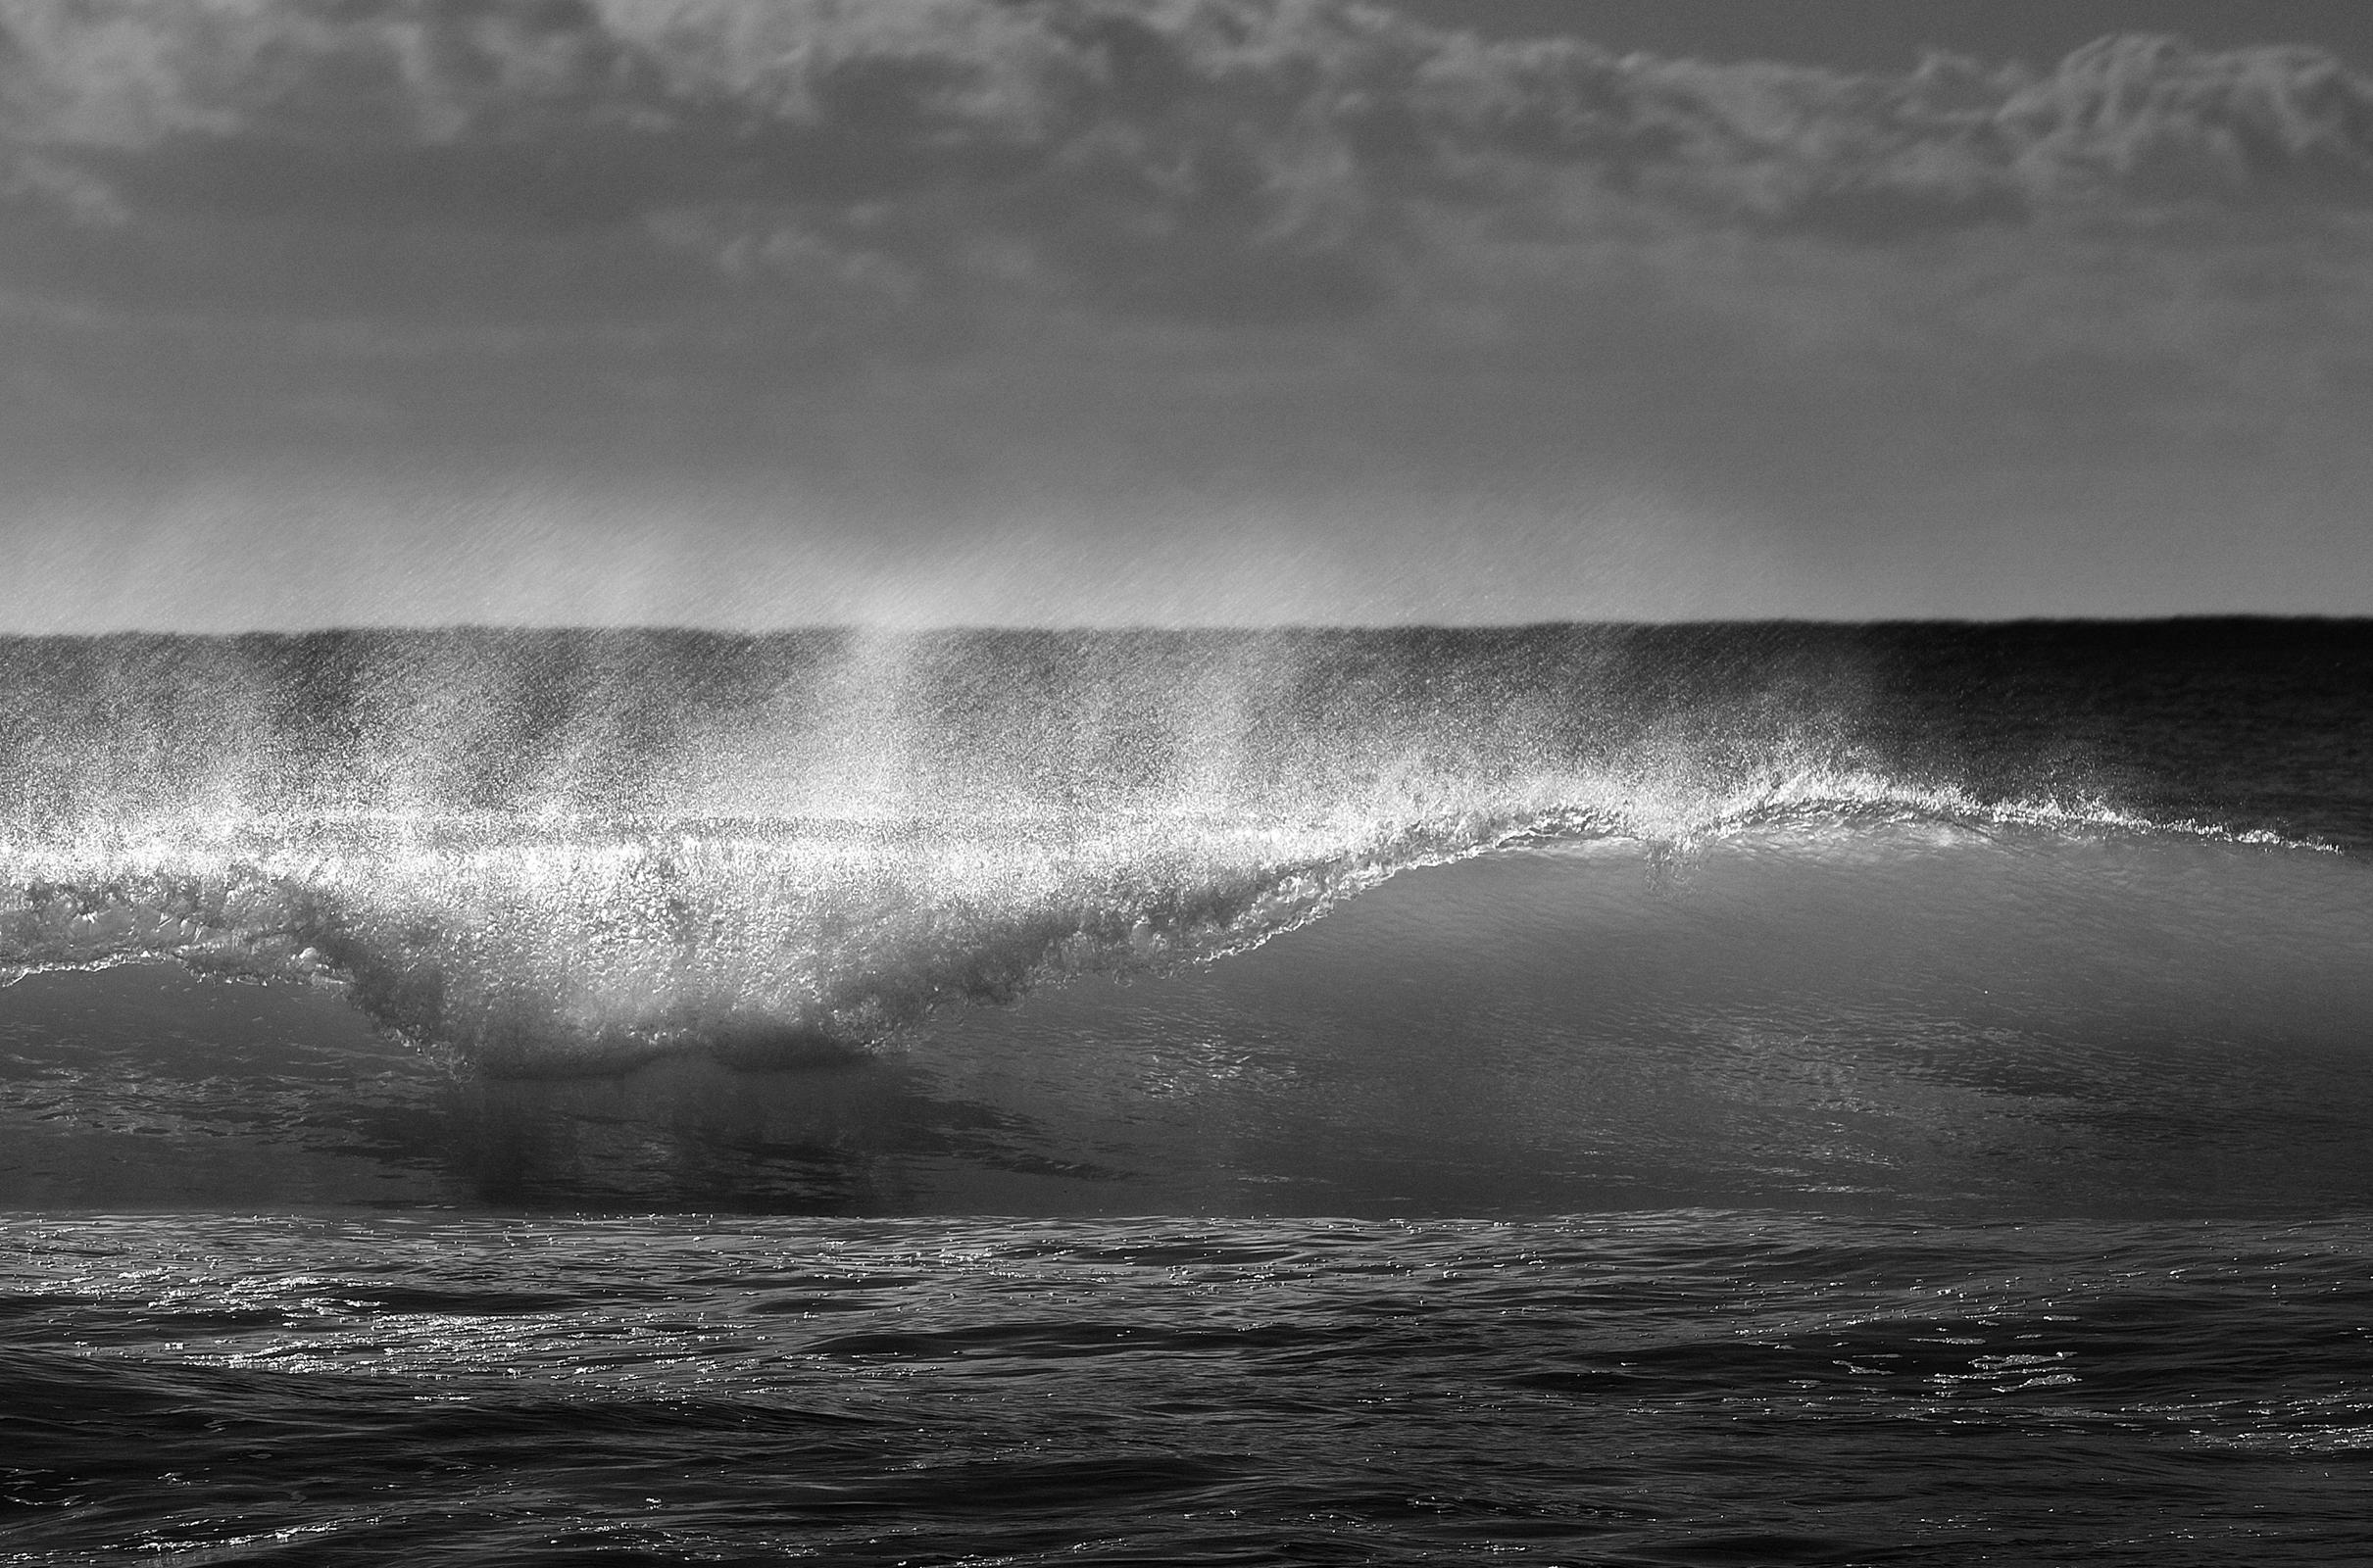 Wave 2 - Signed limited edition archival pigment print, Edition of 5
Breaking wave on the Spanish coast

This is an Archival Pigment print on fiber based paper ( Hahnemühle Photo Rag® Baryta 315 gsm , Acid-free and lignin-free paper, Museum quality